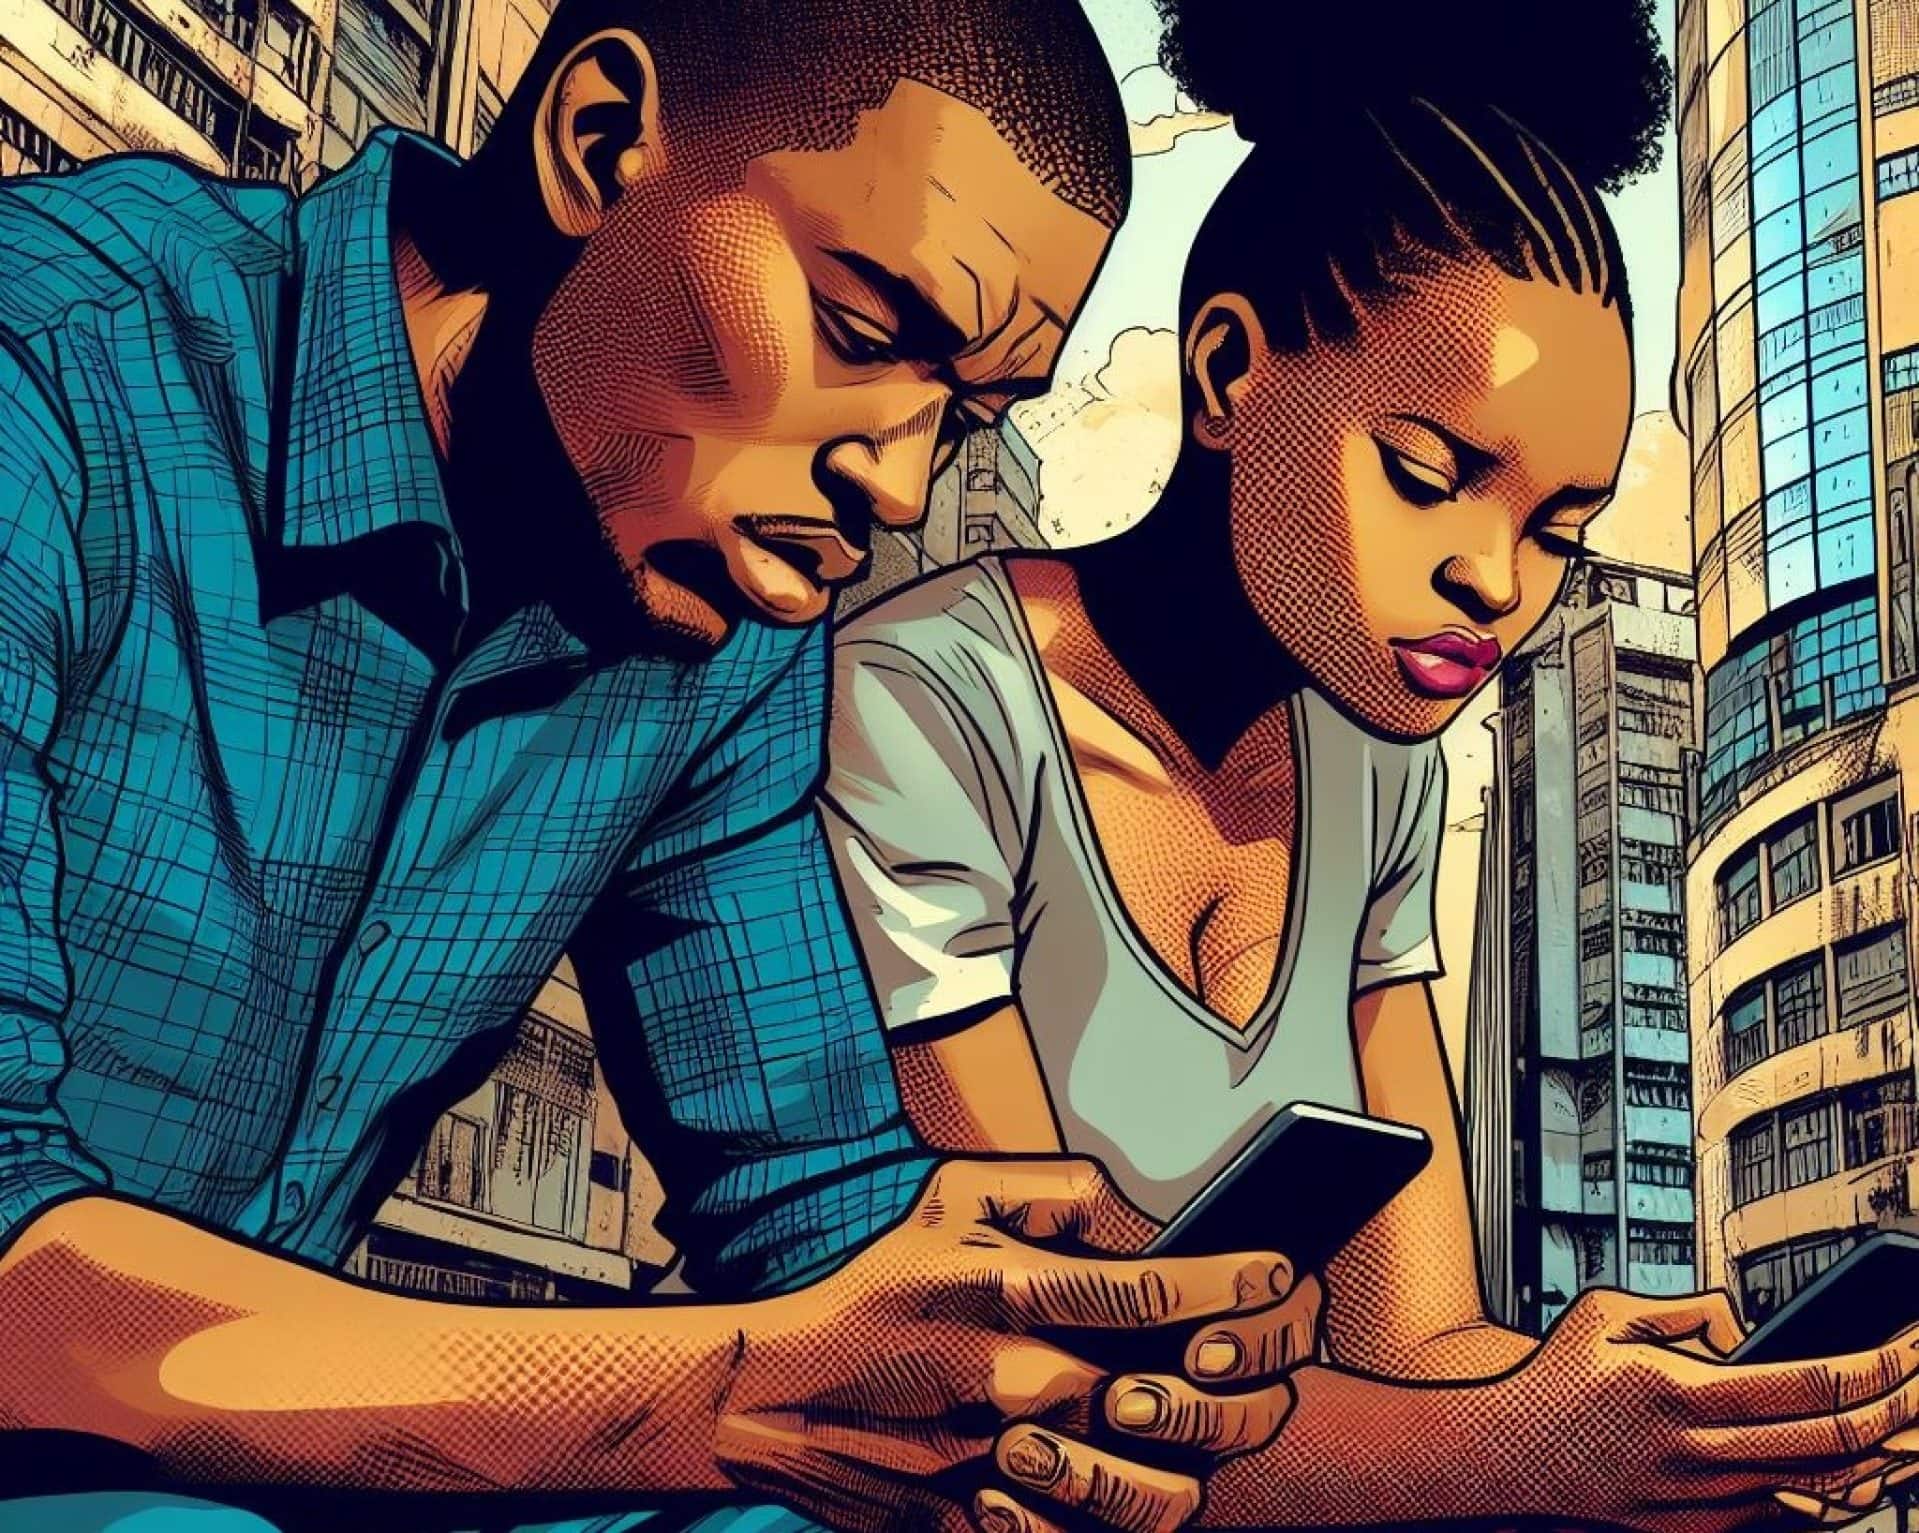 A man and woman are engrossed in their cell phones.